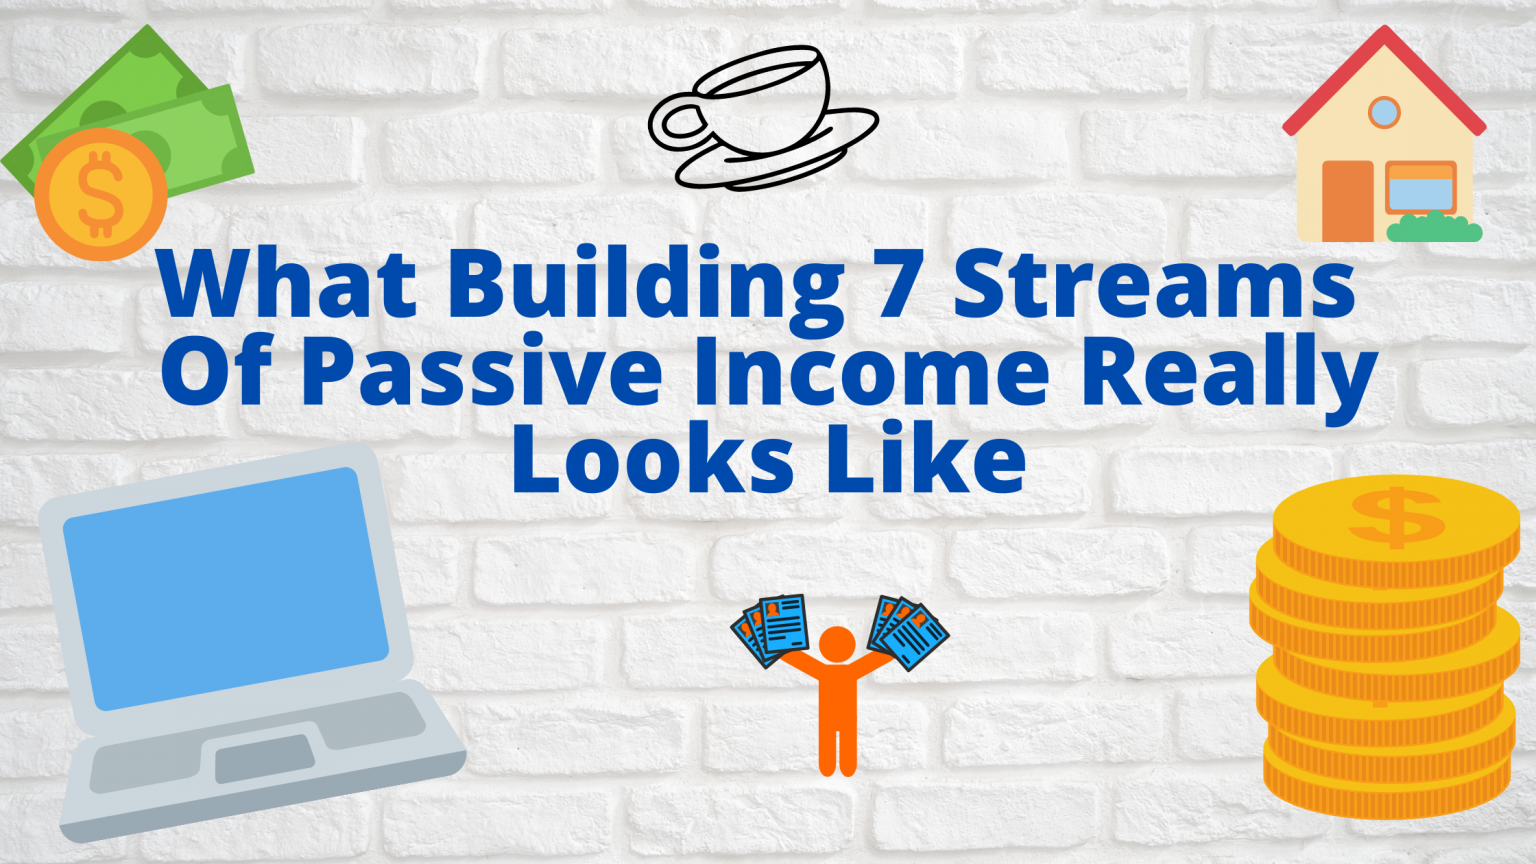 What Building 7 Streams Of Passive Income Really Looks Like